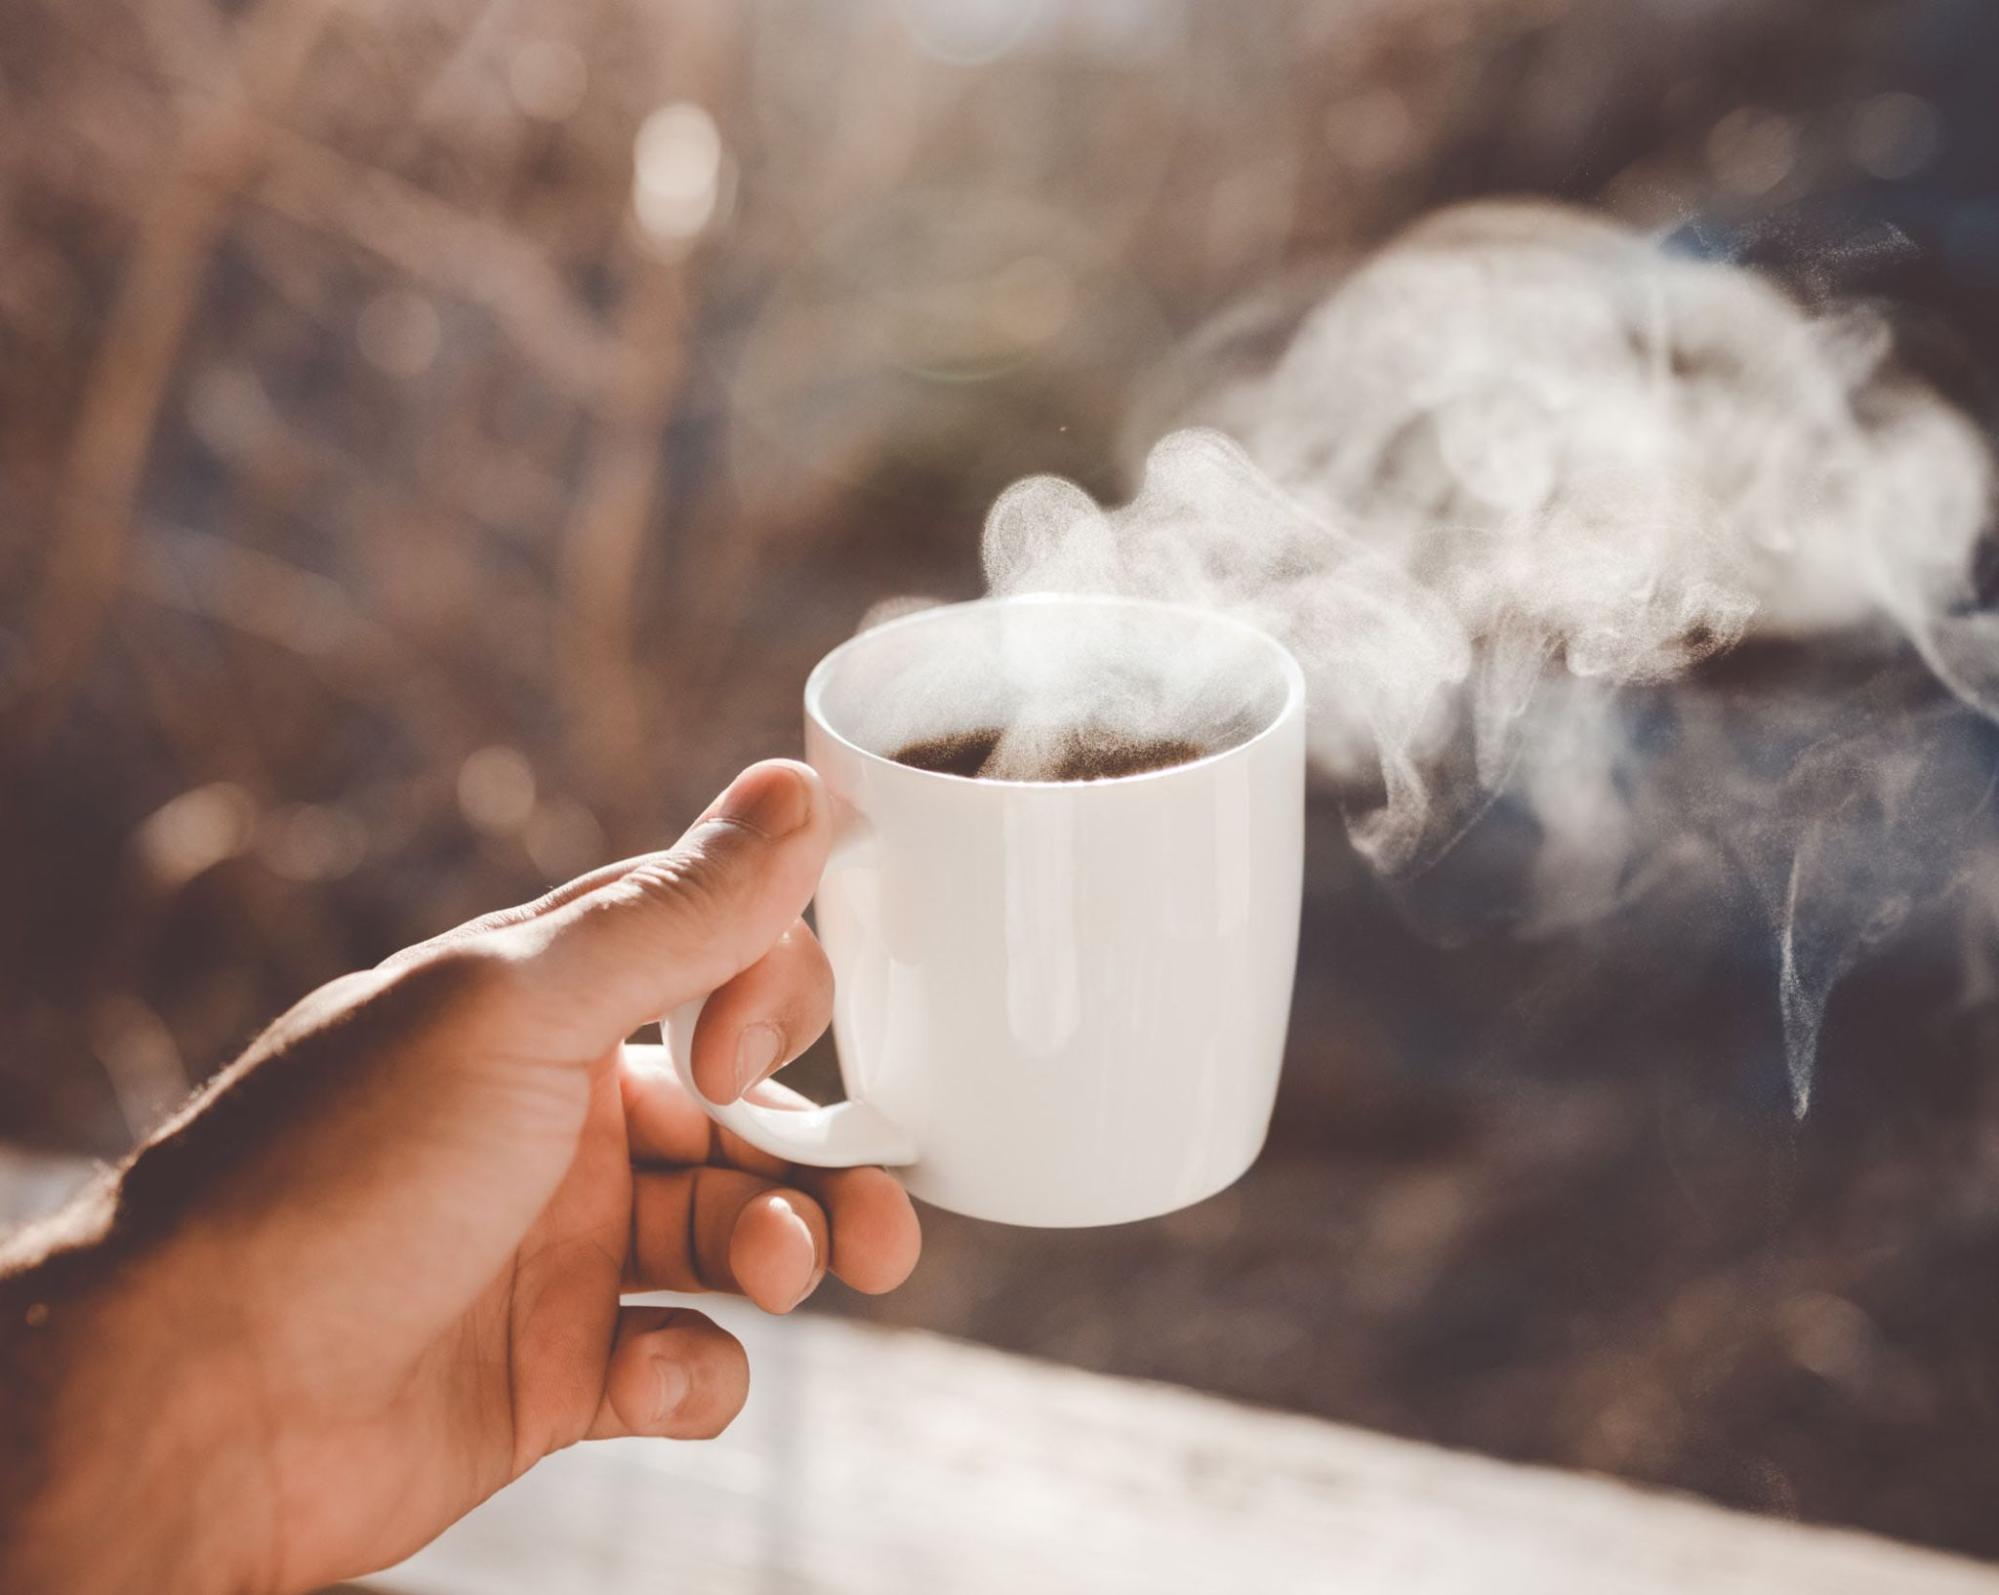 holding mug with steaming drink